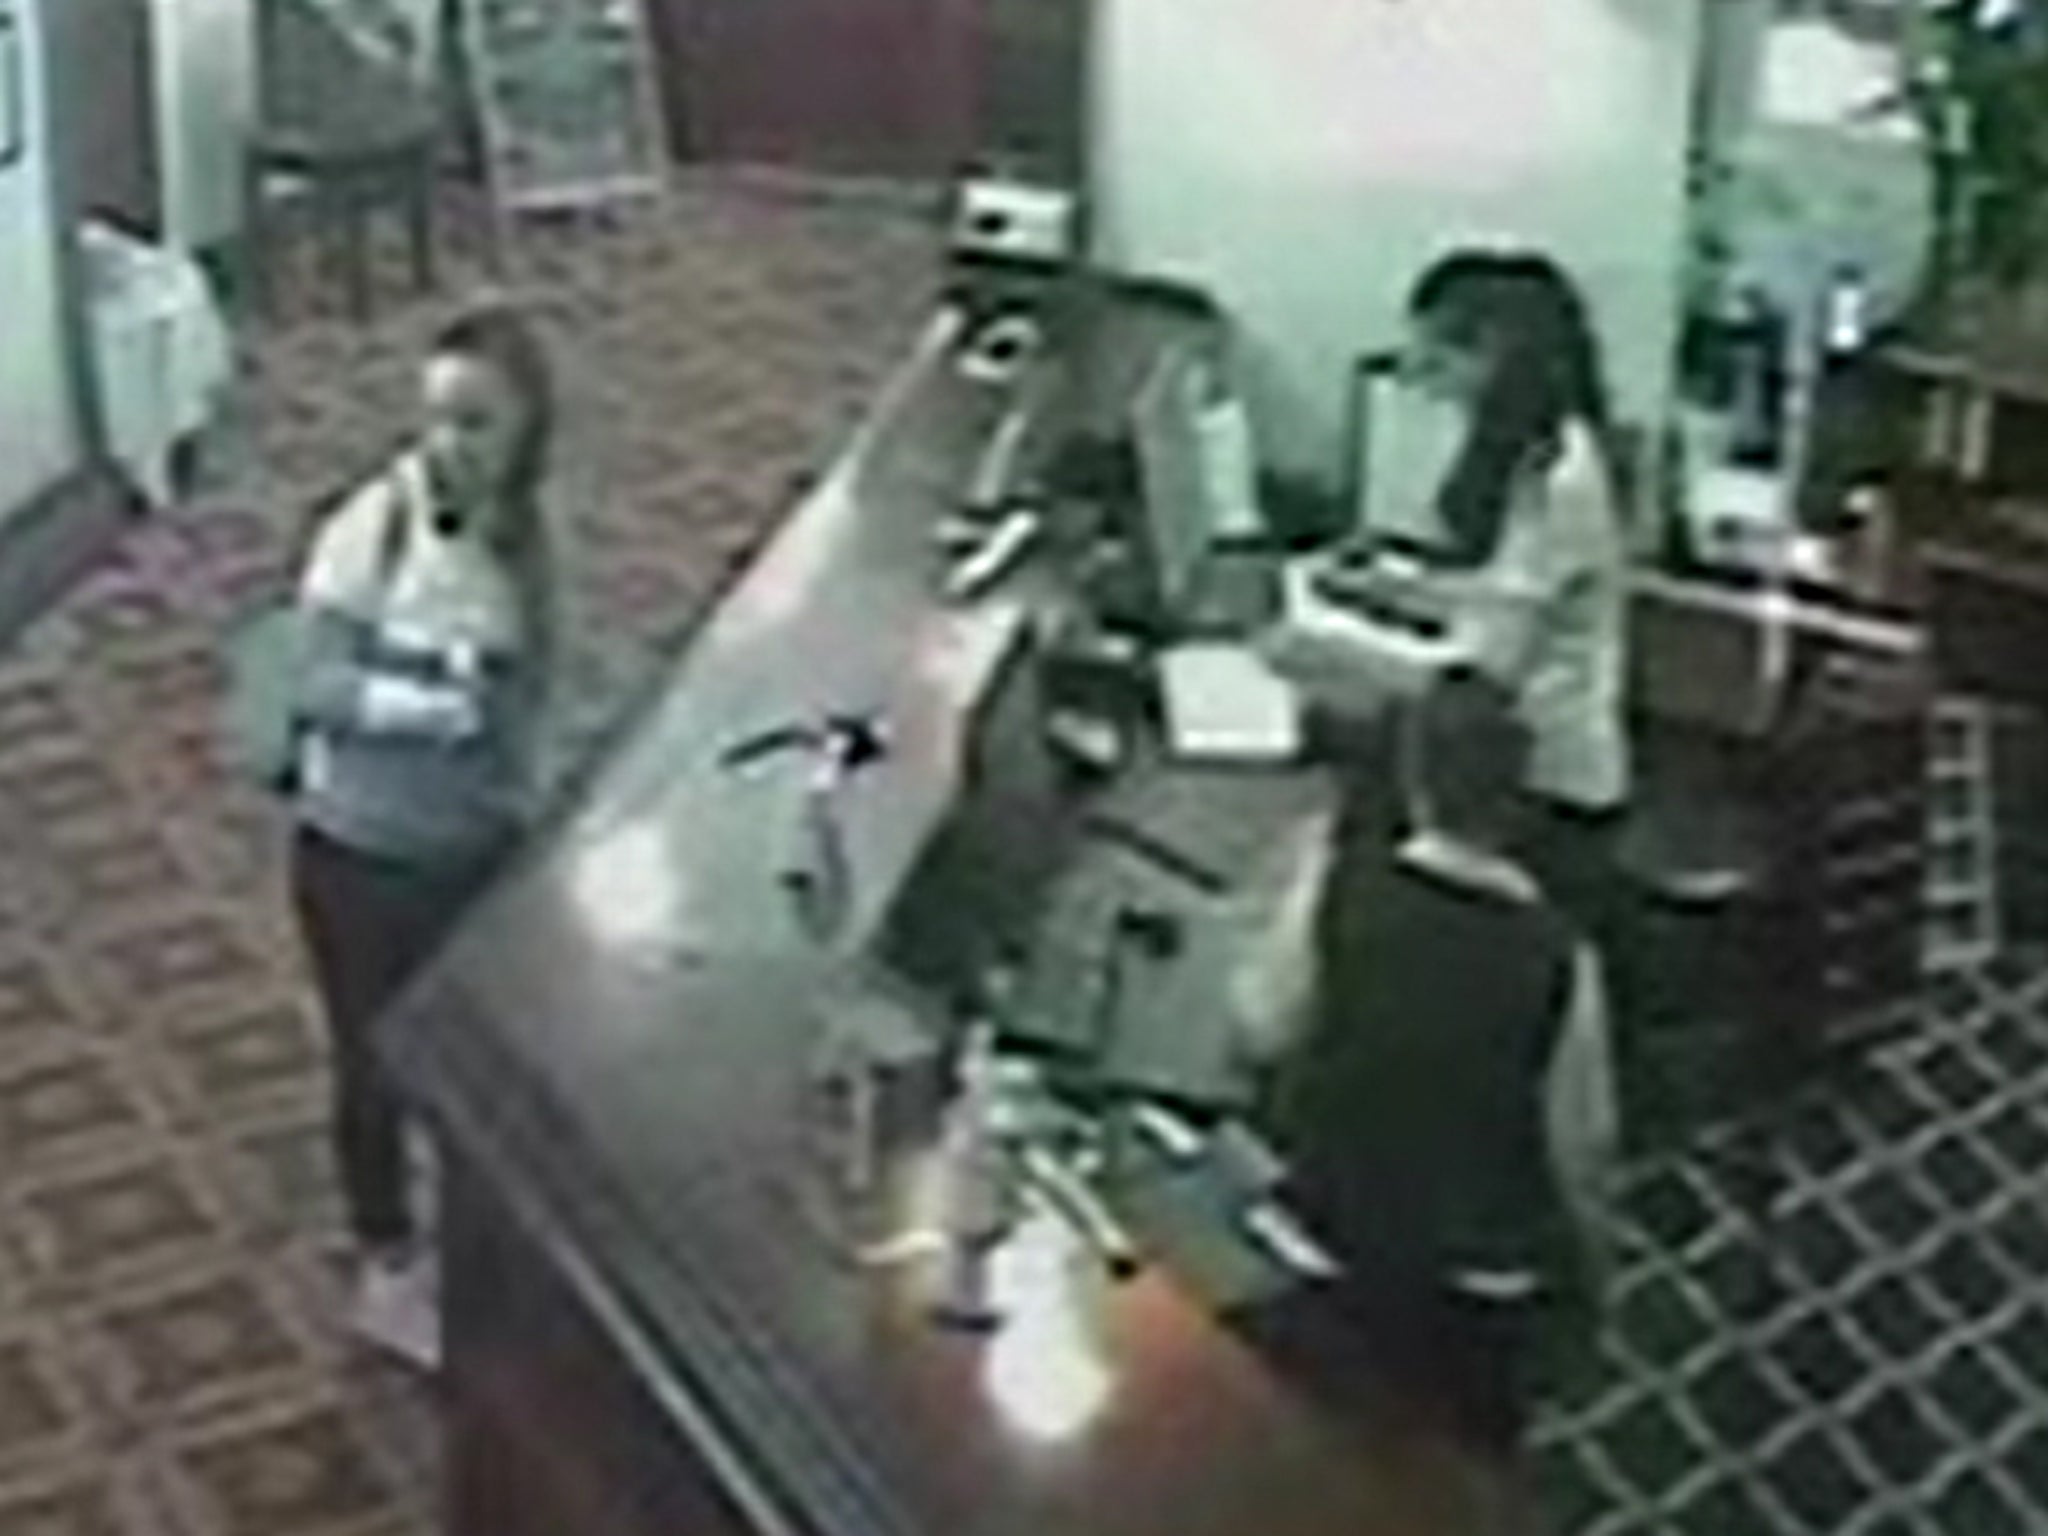 CCTV aired in court shows Williams at a hotel in Blackpool on 30 June 2019, when she claimed she was being trafficked